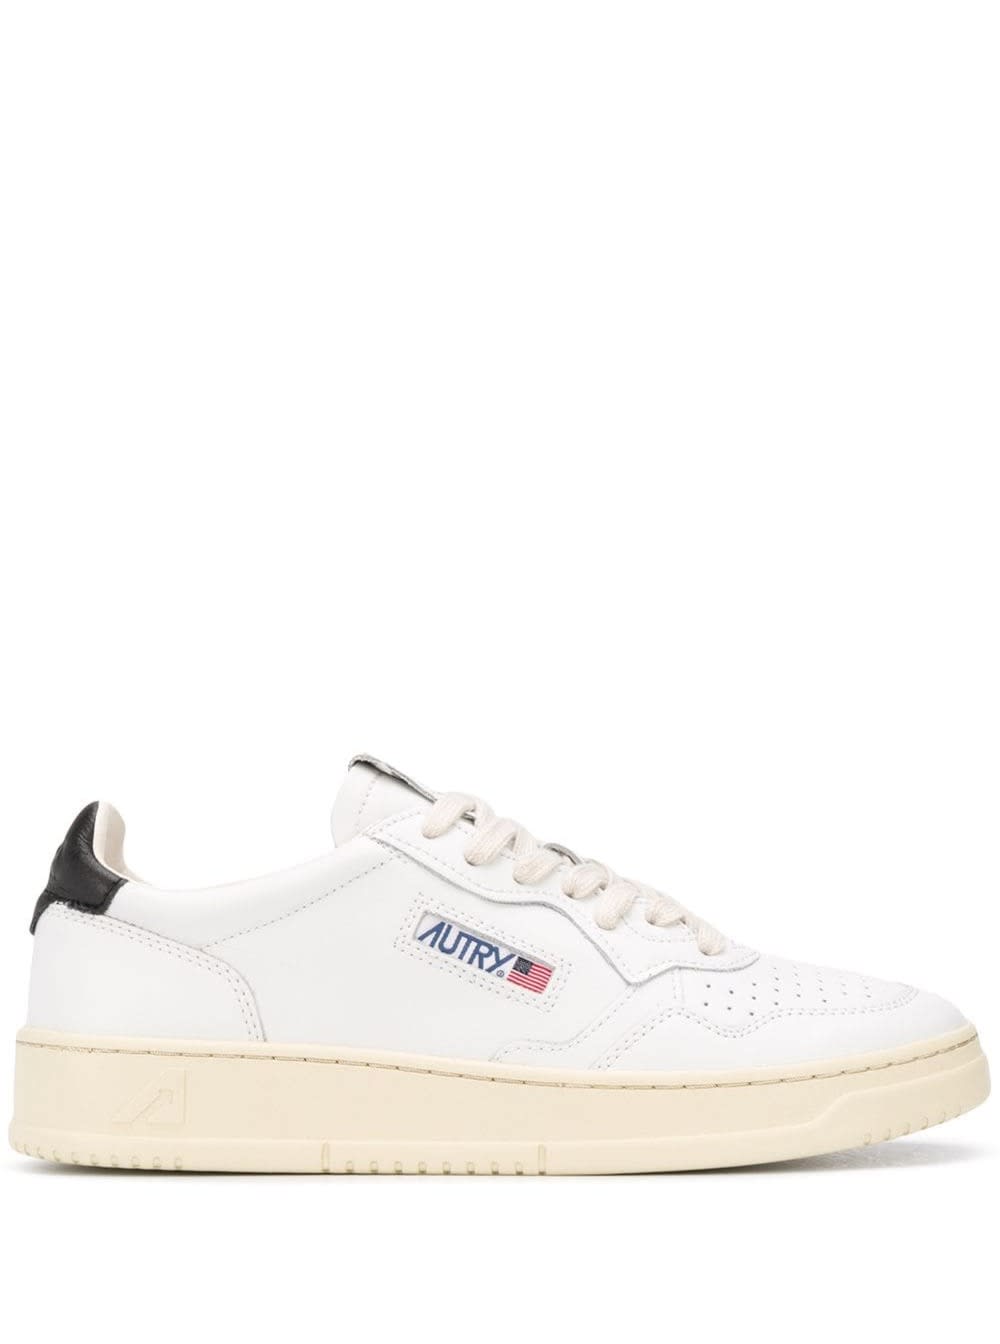 Autry Leather Sneakers With Contrasting Heel Tab